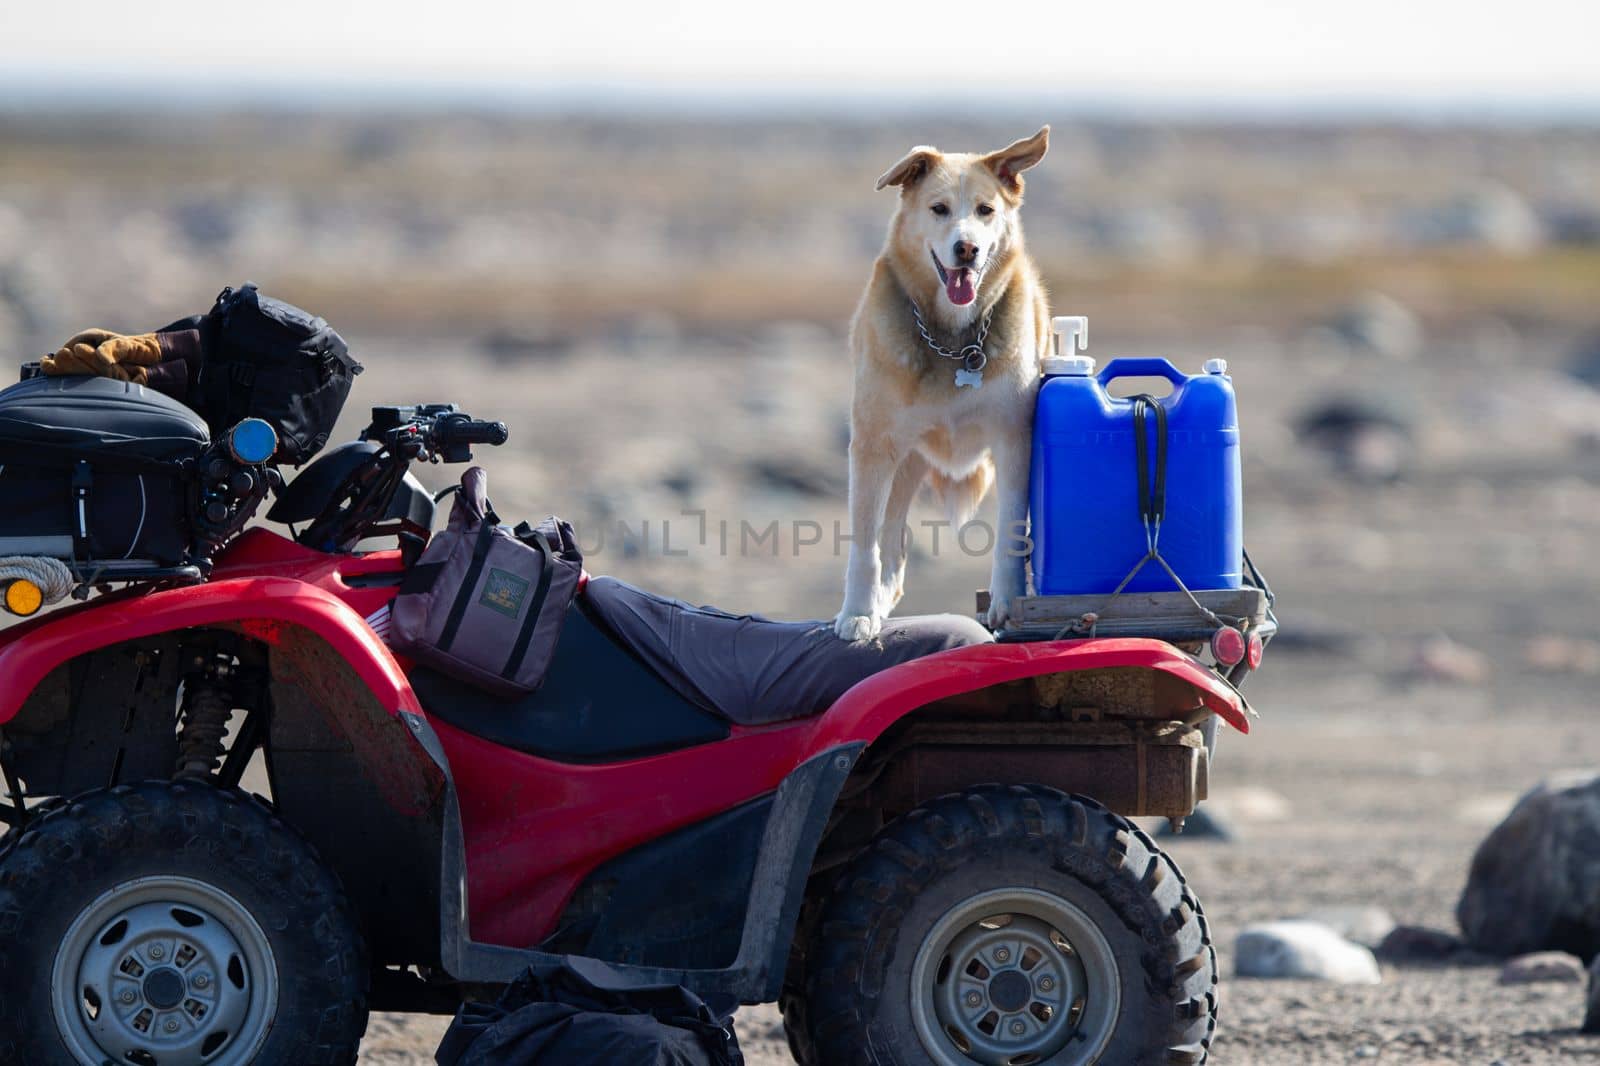 A yellow Labrador dog stands on an all-terrain vehicle or quad or ATV ready to go riding